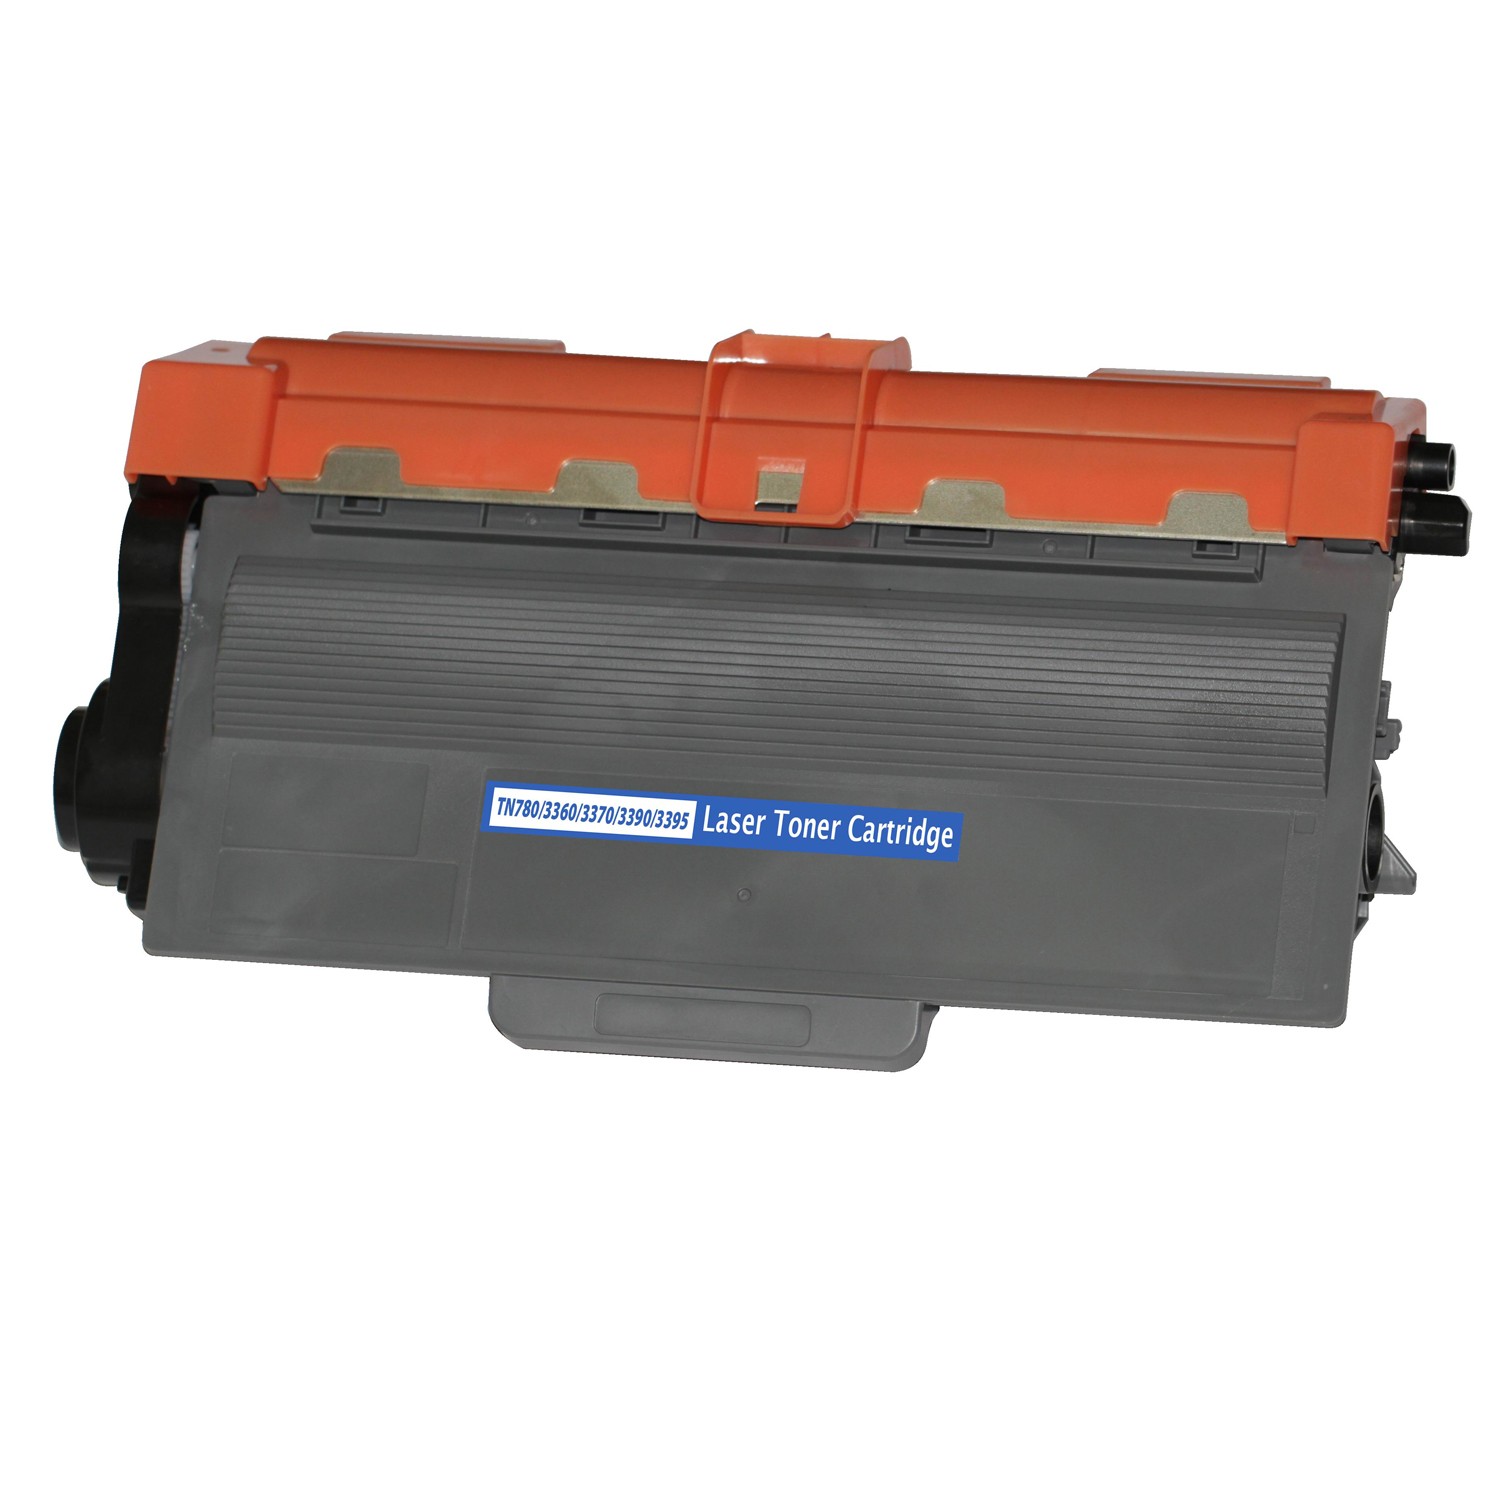 Compatible toner cartridge for Brother TN780/3390